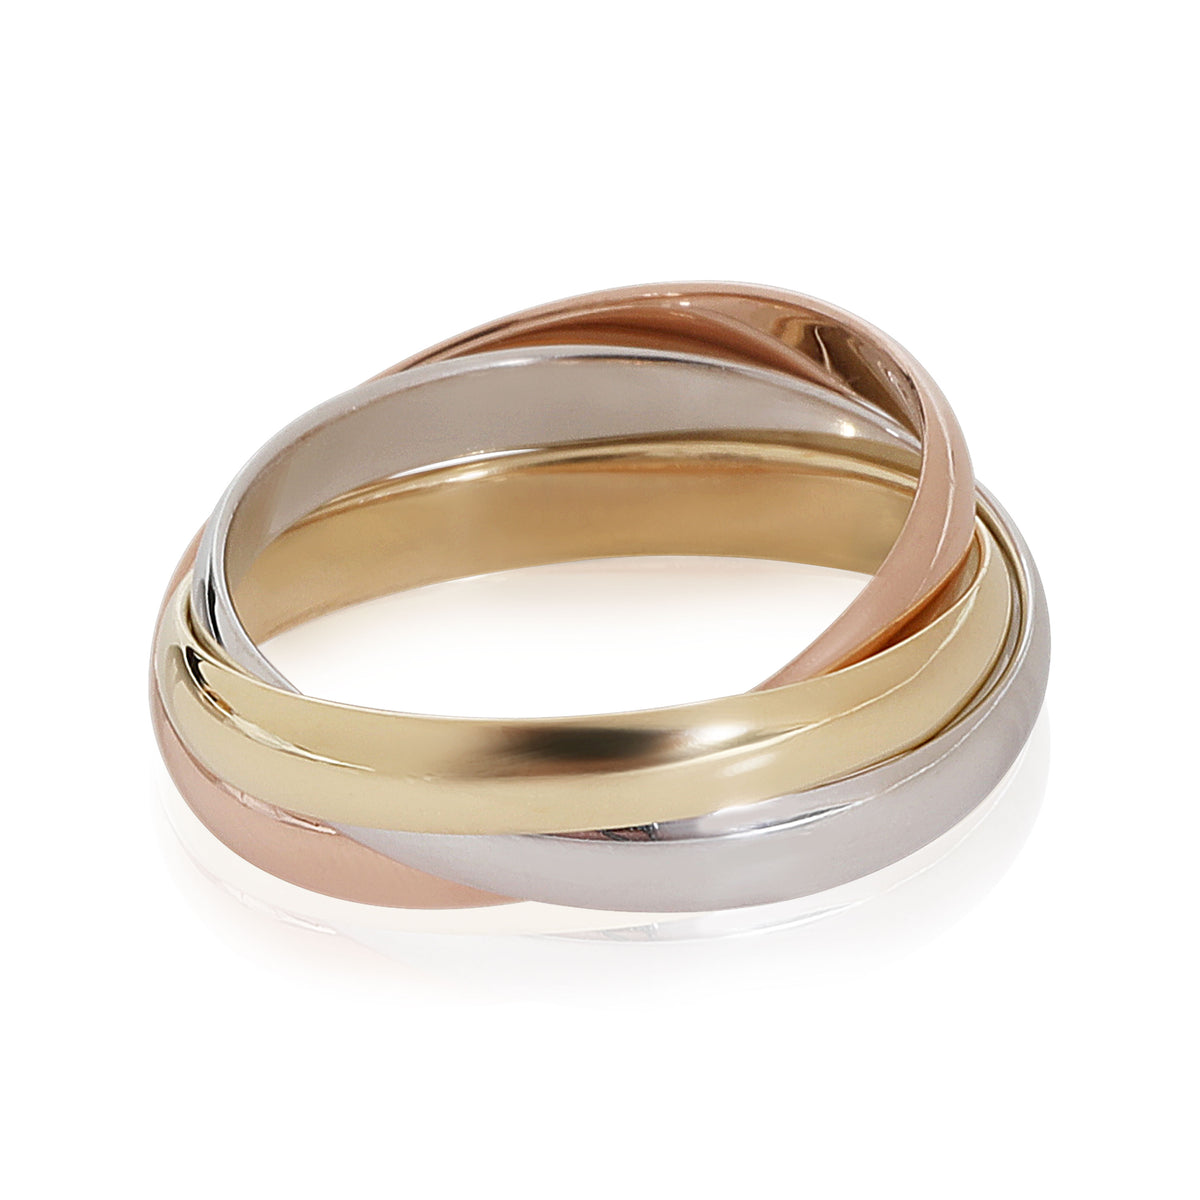 Cartier Trinity 2.7 mm Wide Band in 18K 3 Tone Gold